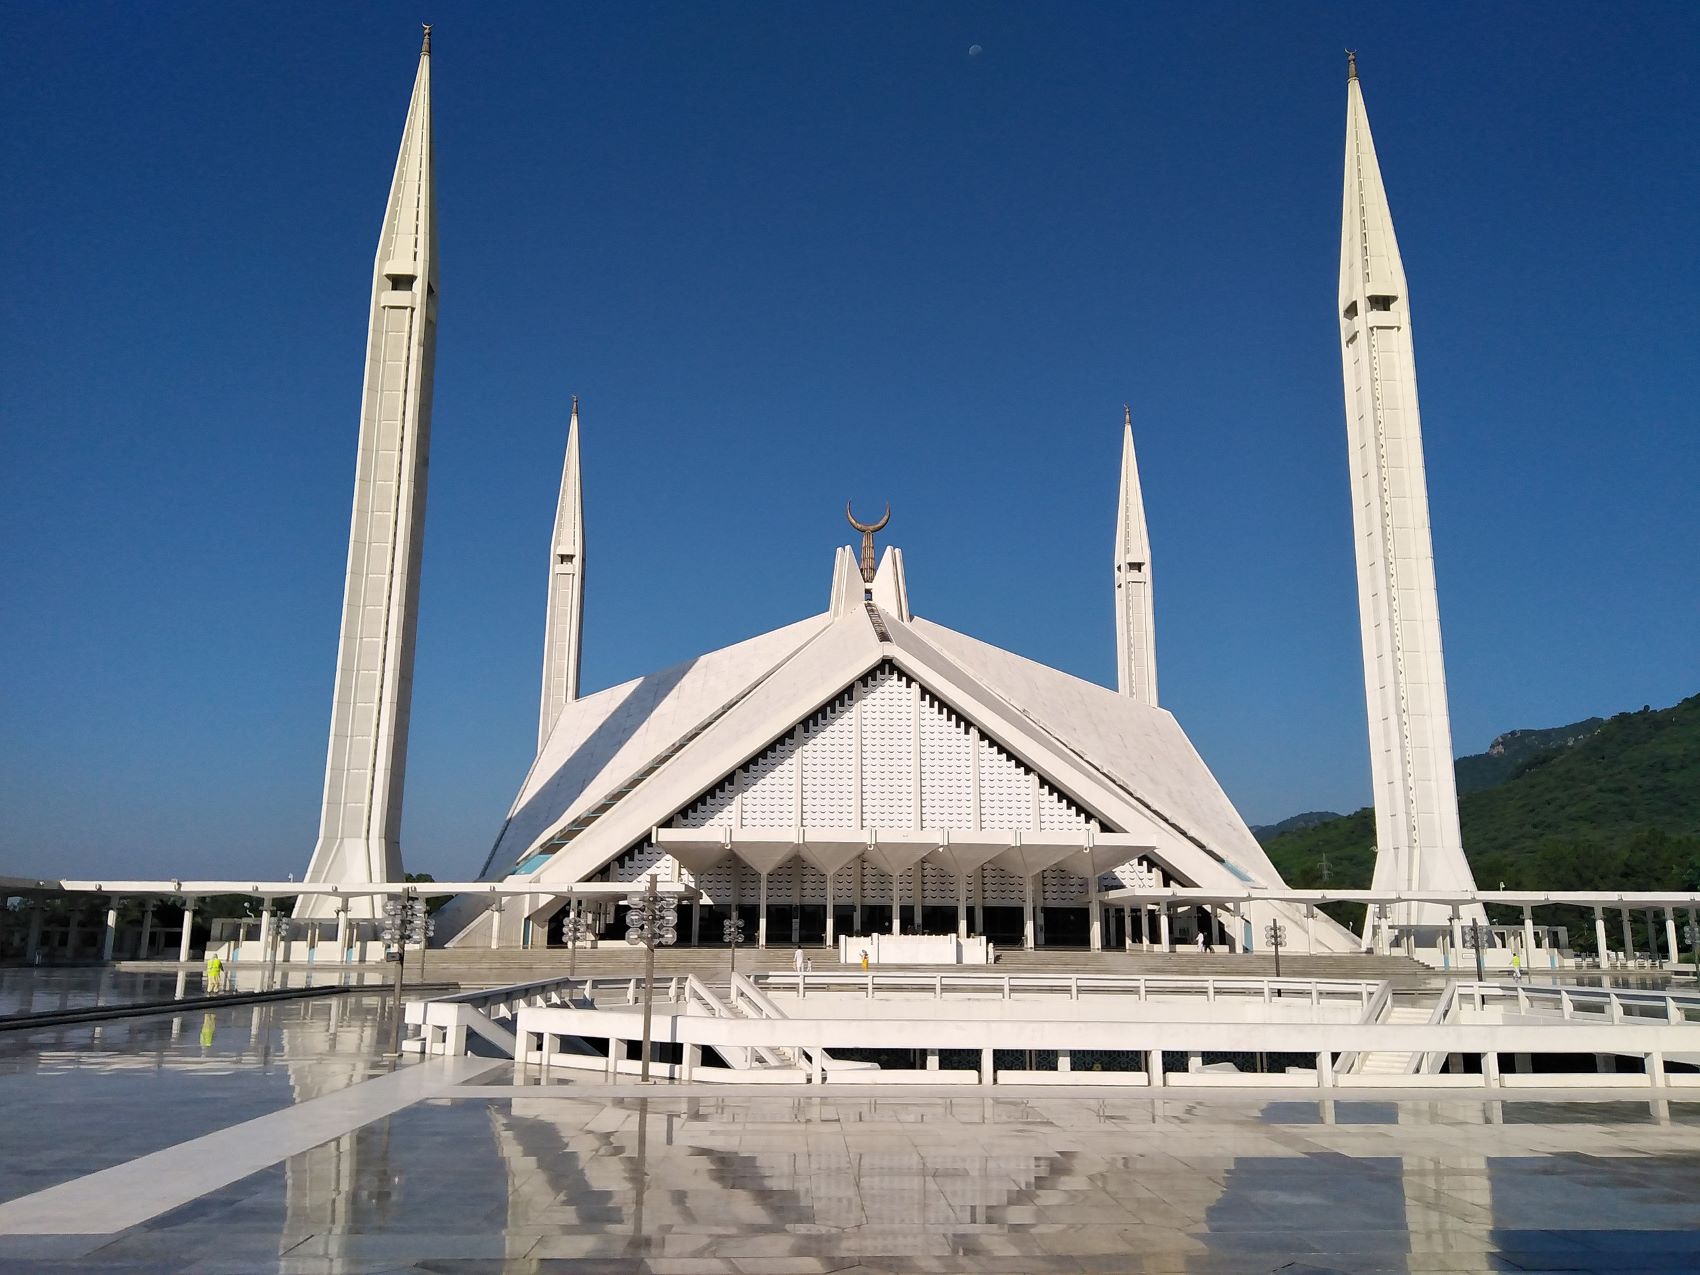 19-astonishing-facts-about-faisal-mosque-1694792527.jpg